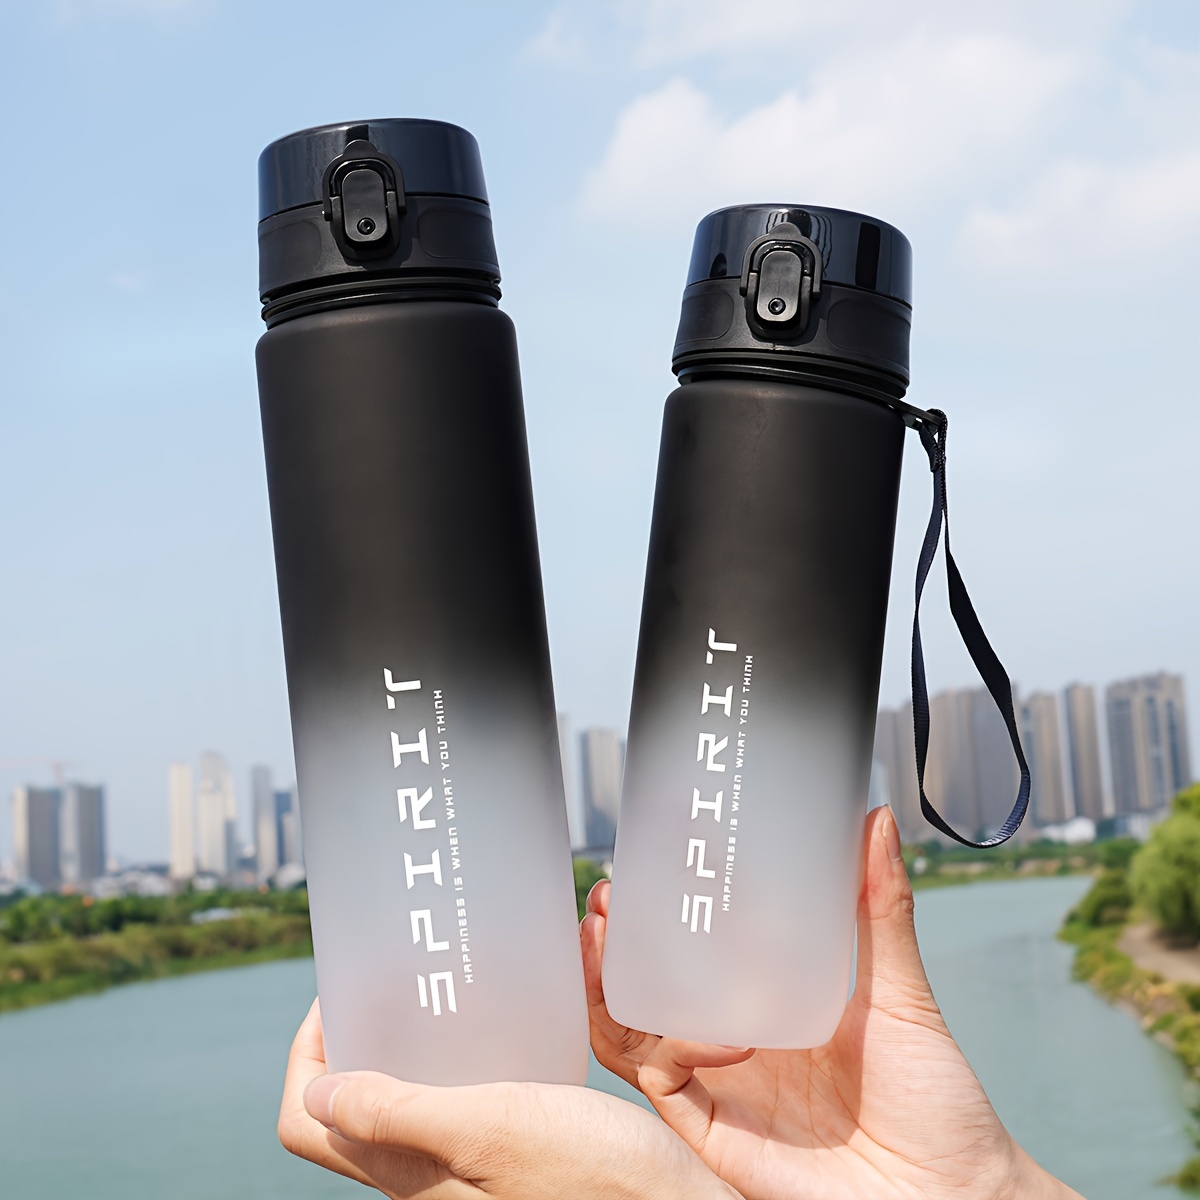 

1pc 1l Gradient Fashion Water Bottle - Large Capacity, Bpa-free Pc Material, Ideal For Sports & Outdoor Activities, Easy To Clean